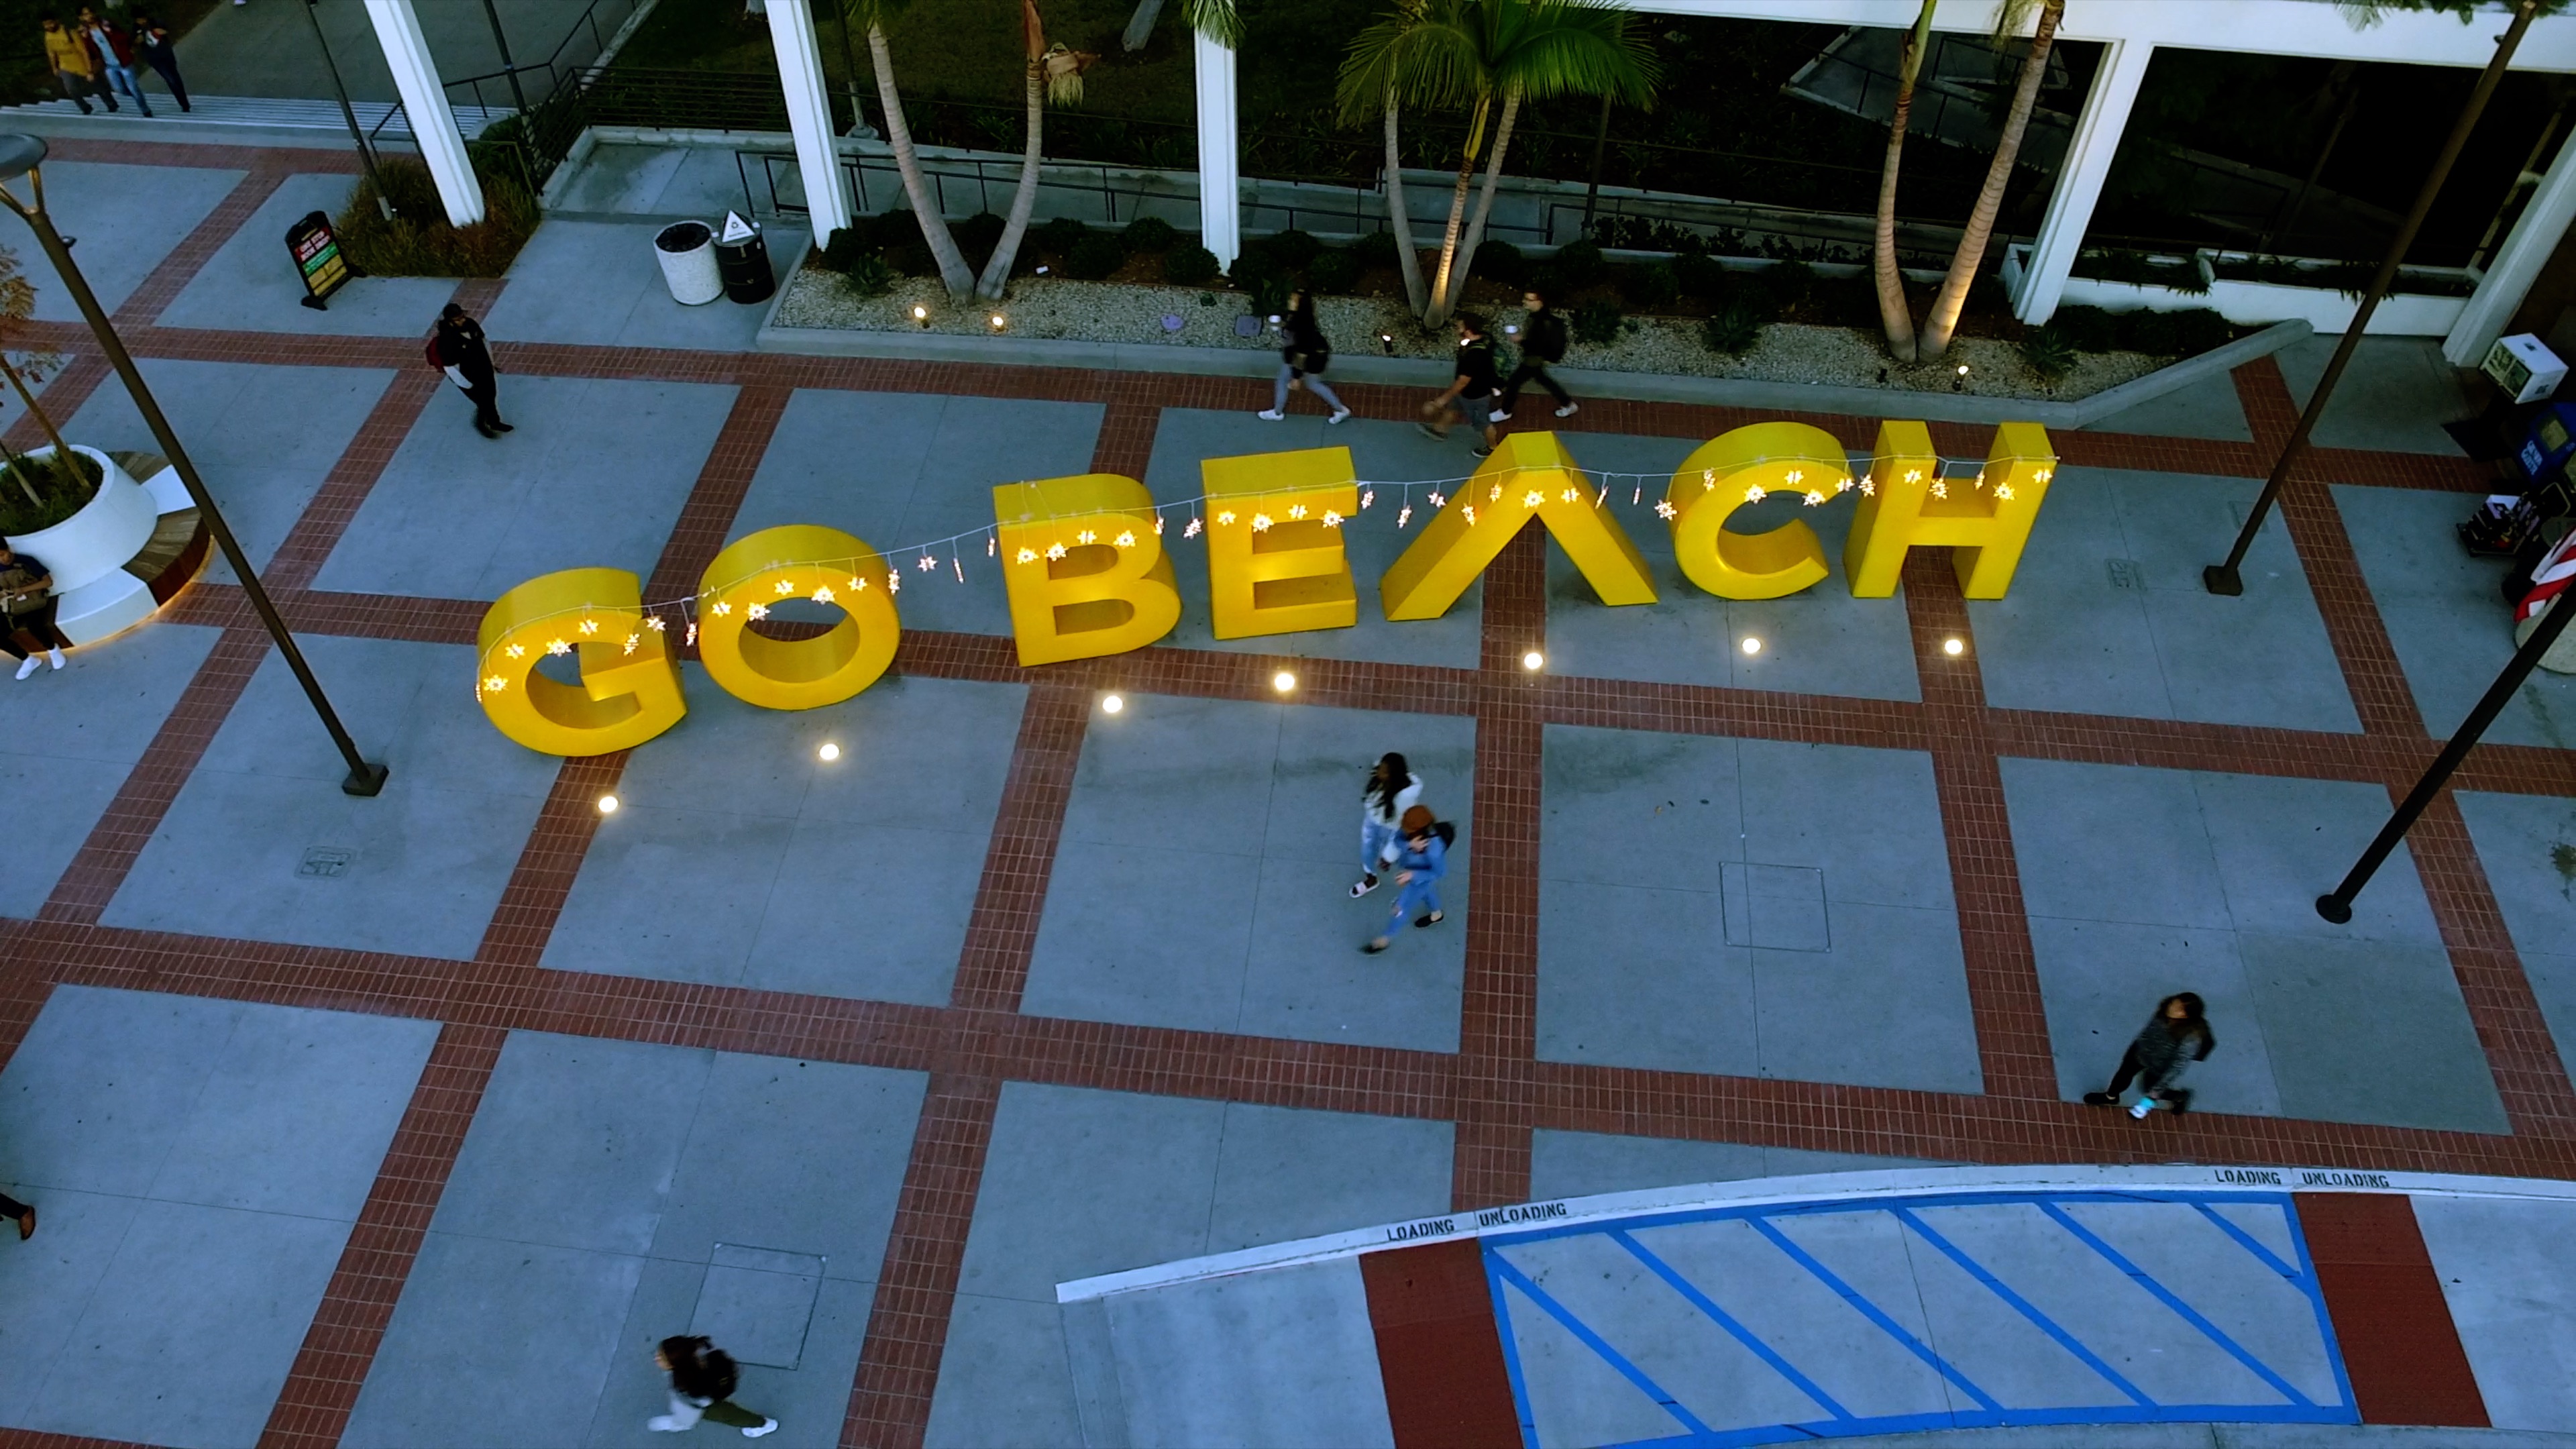 Students walk past the Go Beach sign adorned with holiday lights.